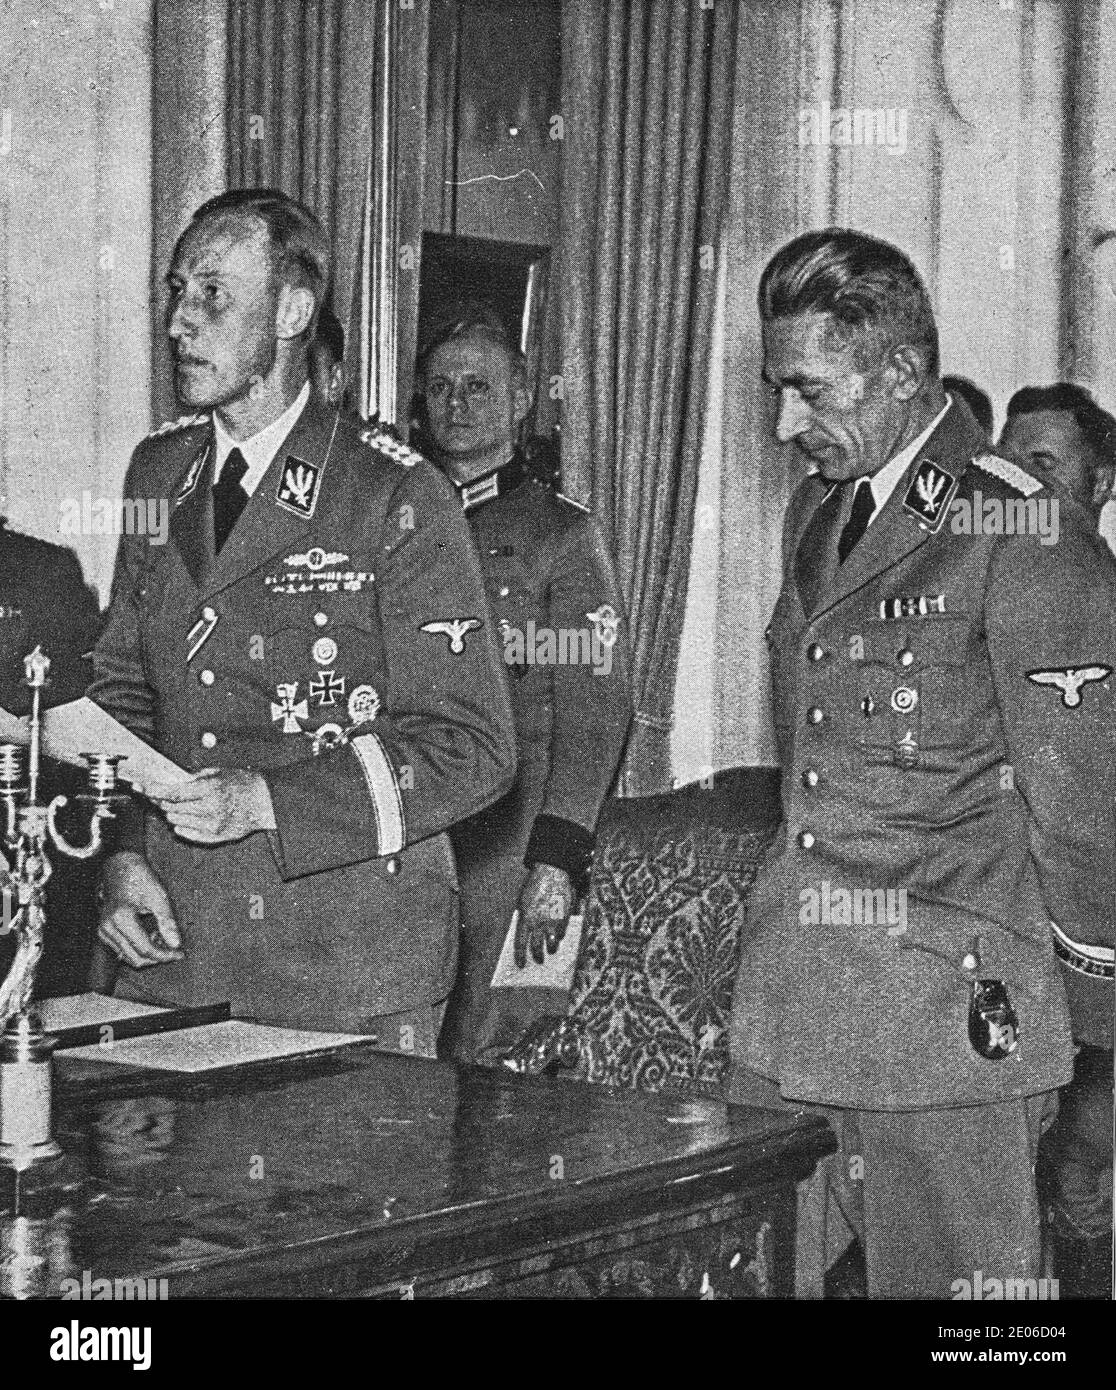 PRAGUE, PROTECTORATE OF BOHEMIA AND MORAVIA - CIRCA 1942: Reinhard Heydrich (left) with Karl Hermann Frank. Heydrich gives a speech to audience. Stock Photo